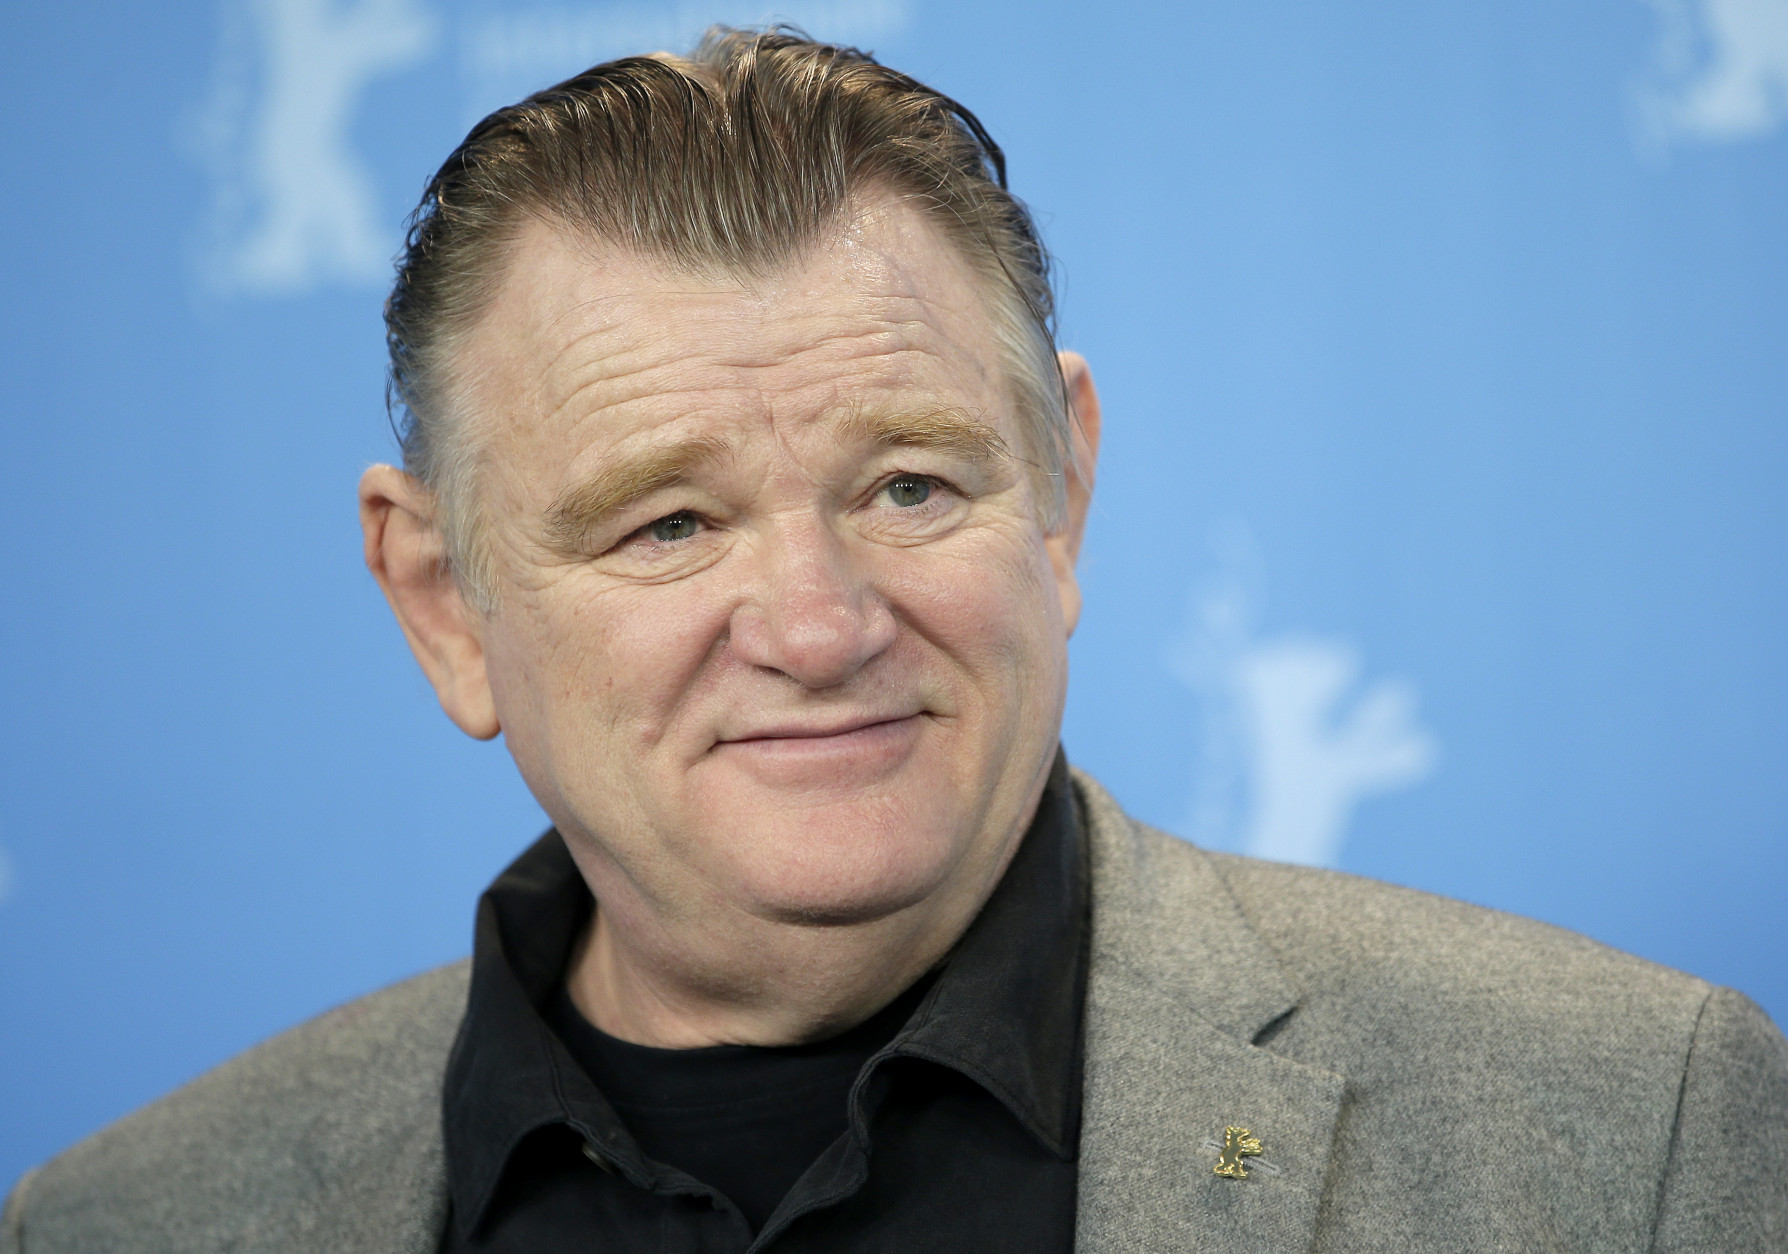 Actor Brendan Gleeson poses for the photographers during a photo call for the film 'Alone in Berlin' at the 2016 Berlinale Film Festival in Berlin, Germany, Monday, Feb. 15, 2016. (AP Photo/Michael Sohn)